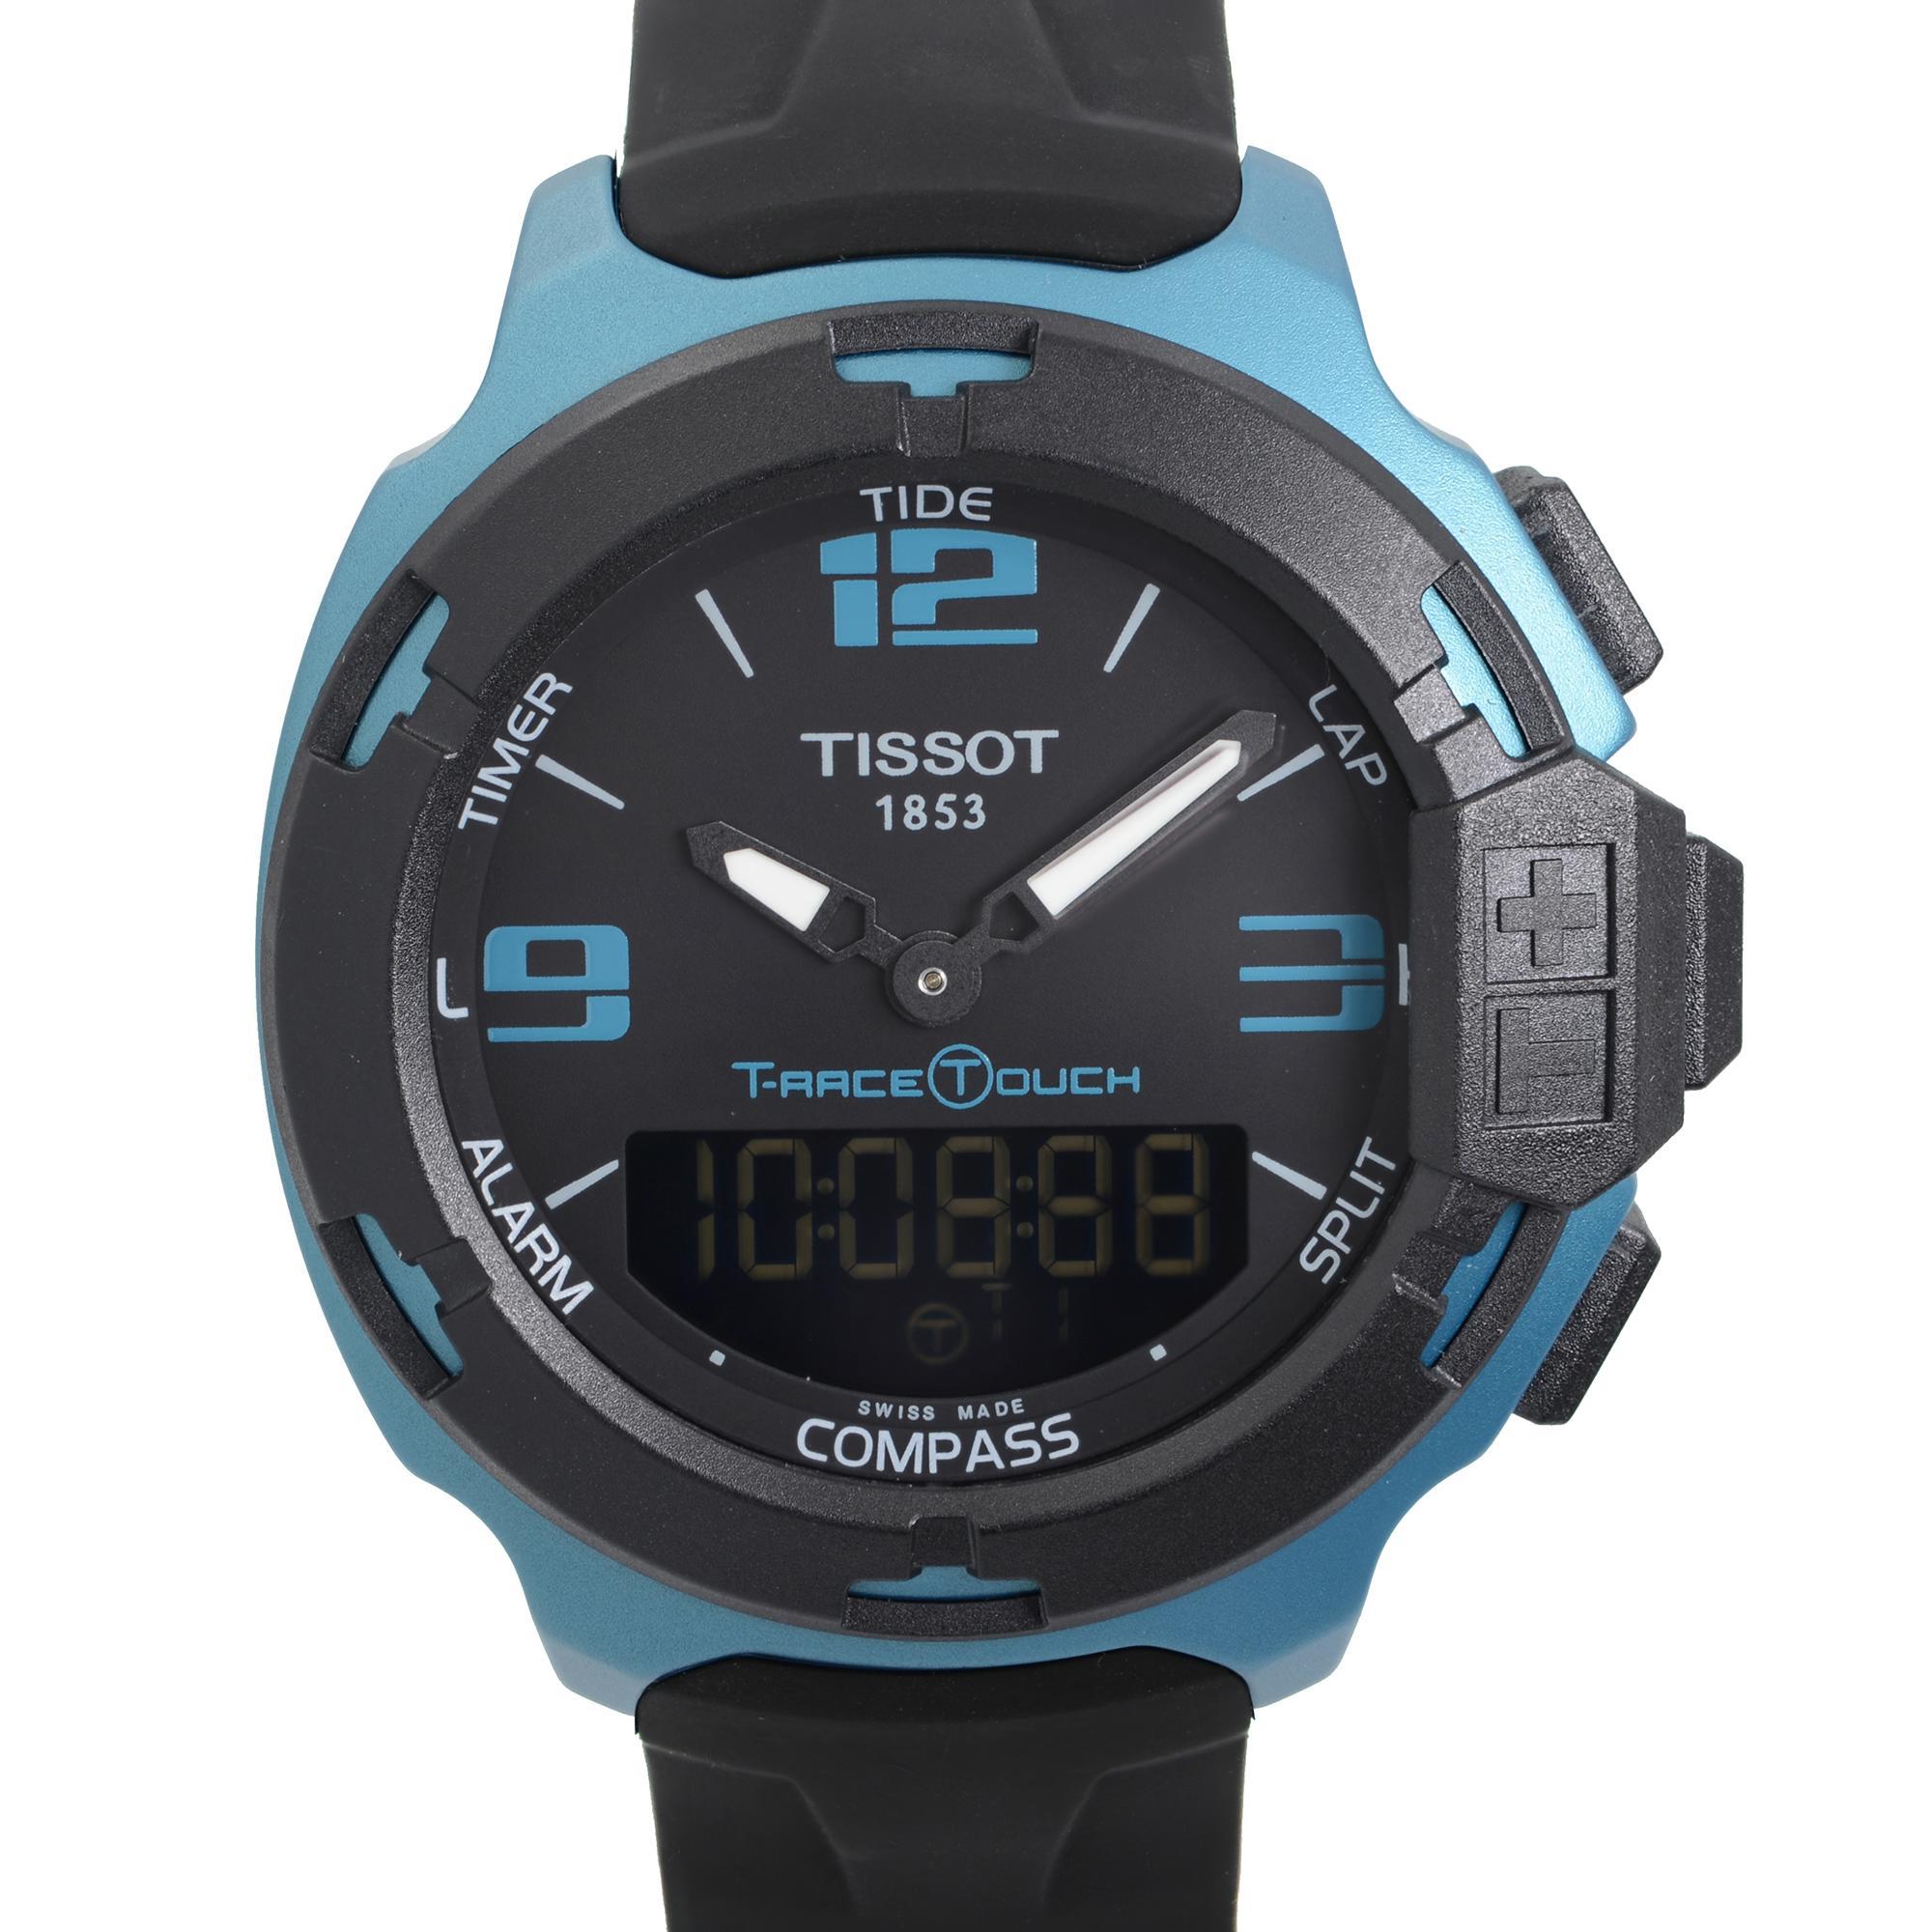 Display Model Tissot T-Race Touch 42mm Aluminium Black Dial Mens Quartz Watch T081.420.97.057.04. This timepiece is powered by Quartz (battery) movement with features: Blue Aluminum Case with Titanium case back and Black Rubber Straps. Fixed black